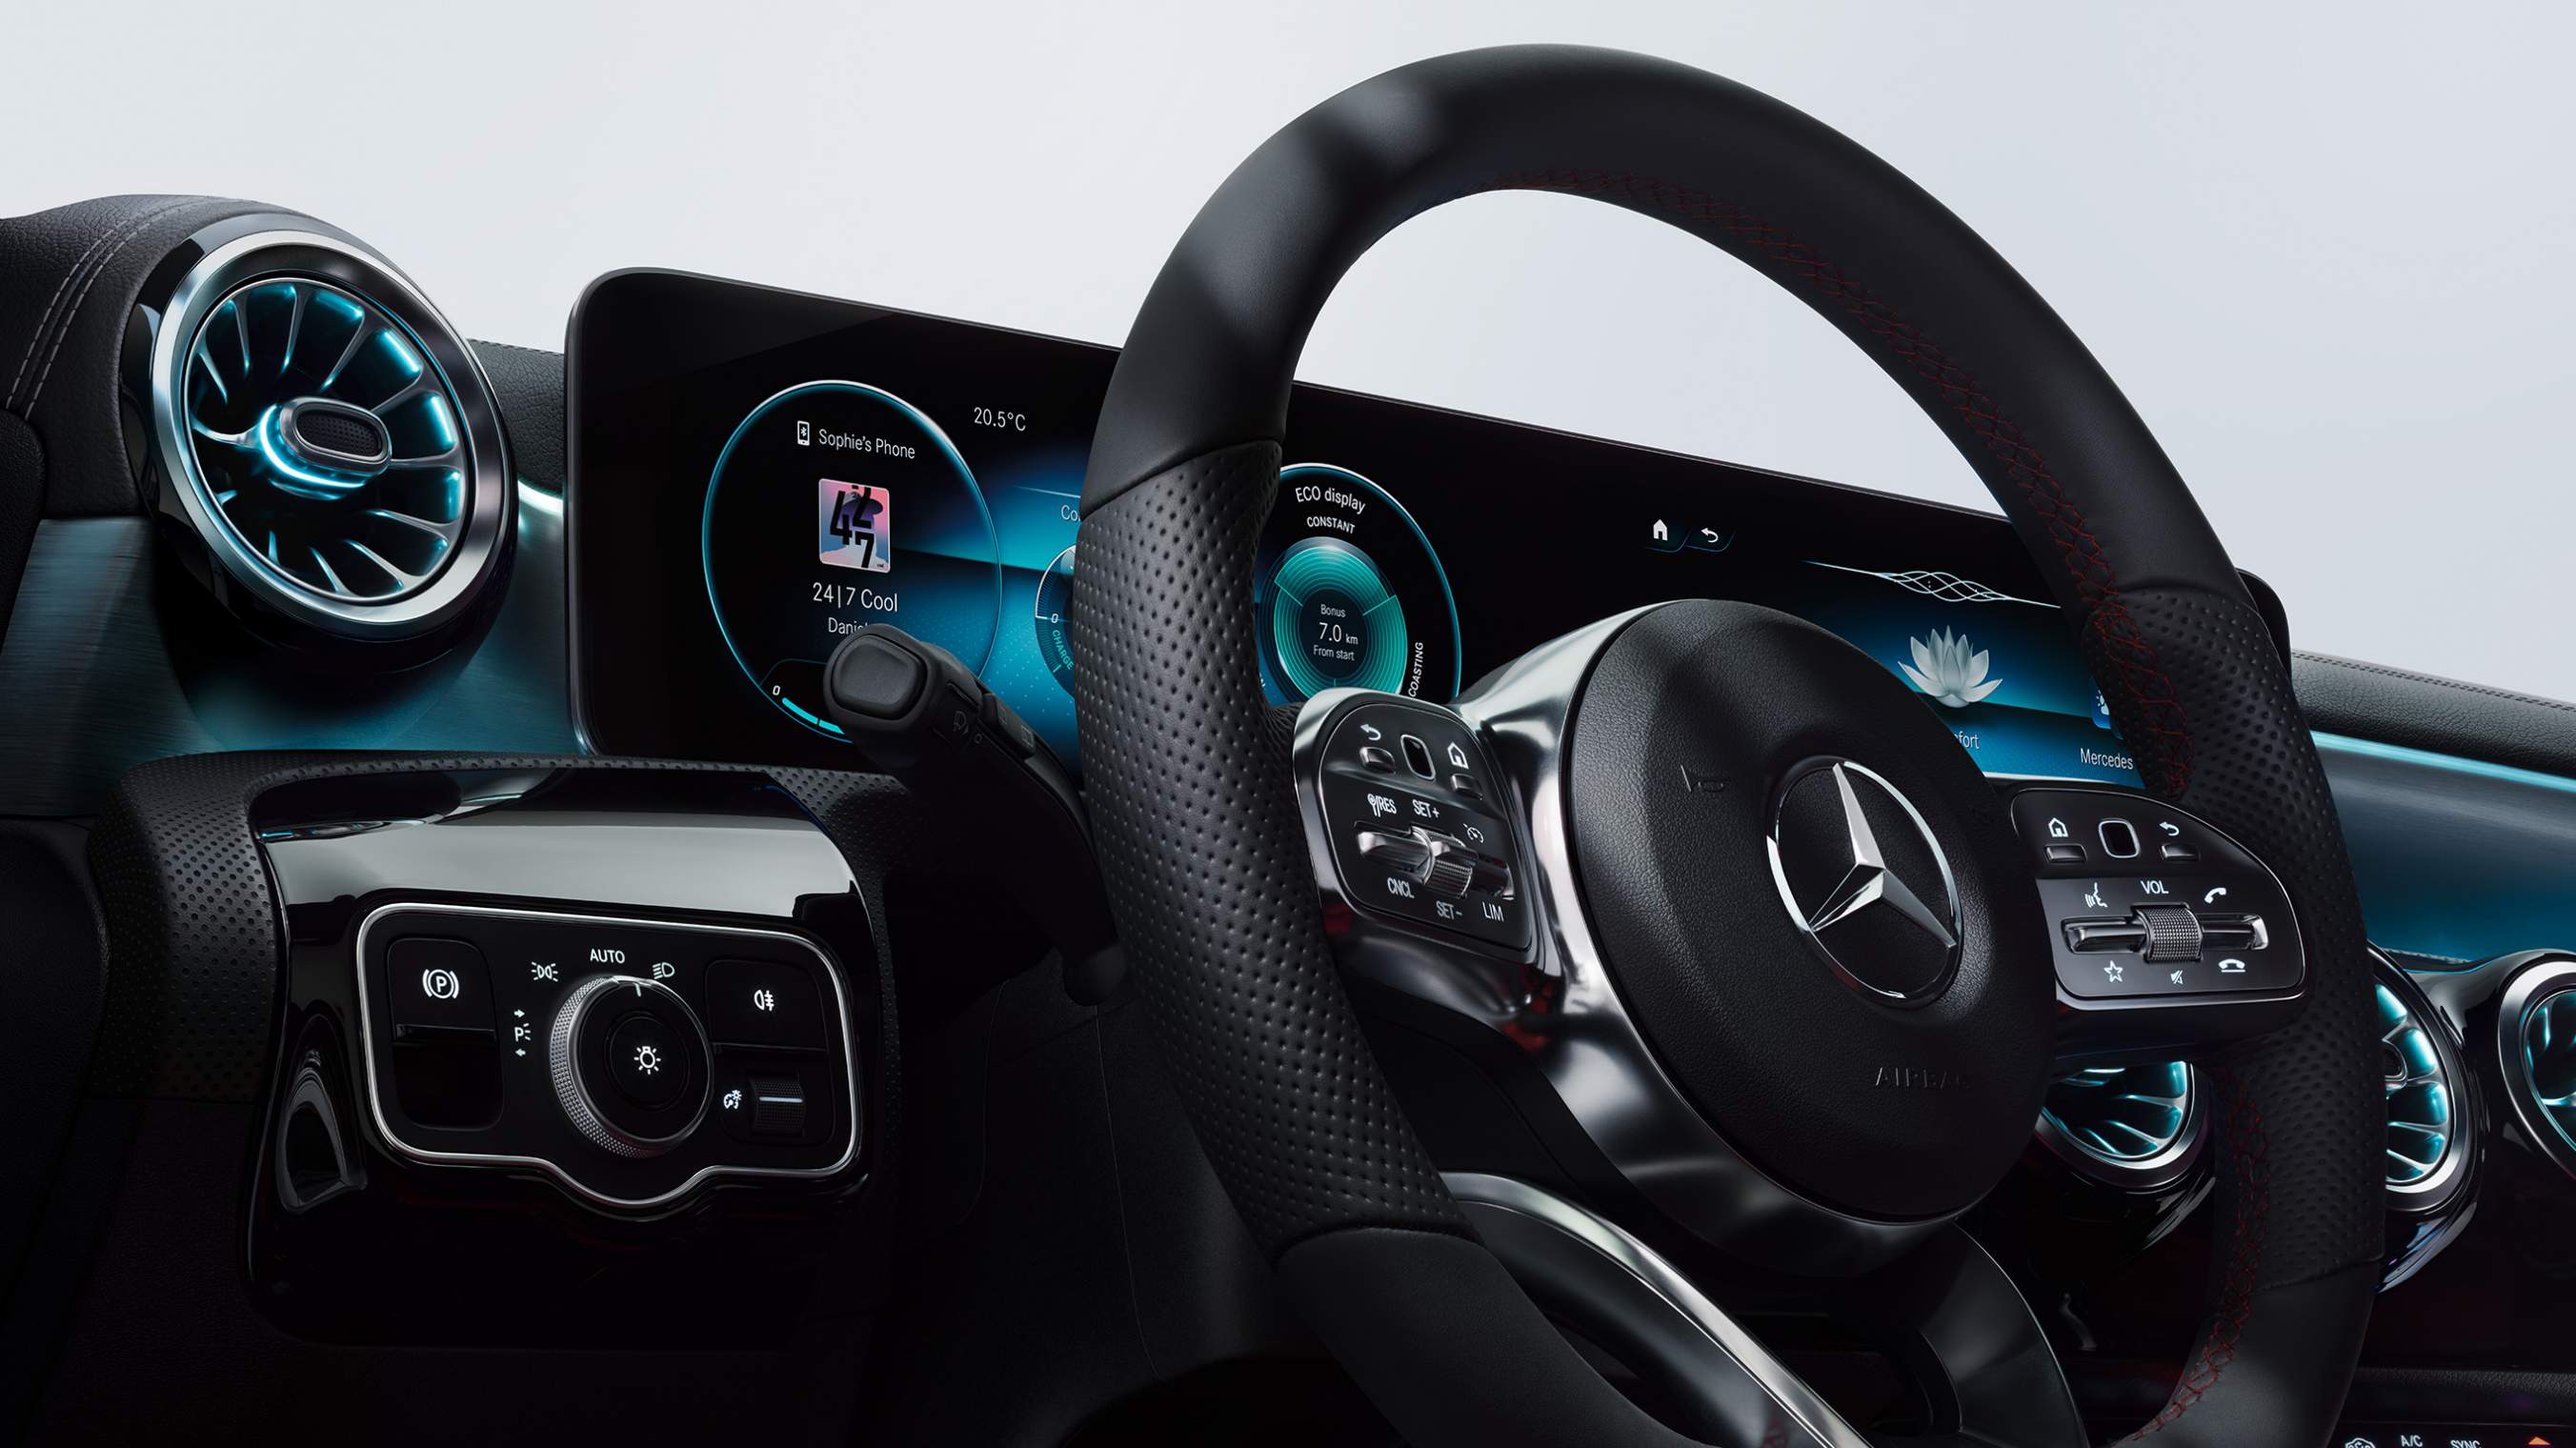 MBUX / Mercedes-Benz User Experience